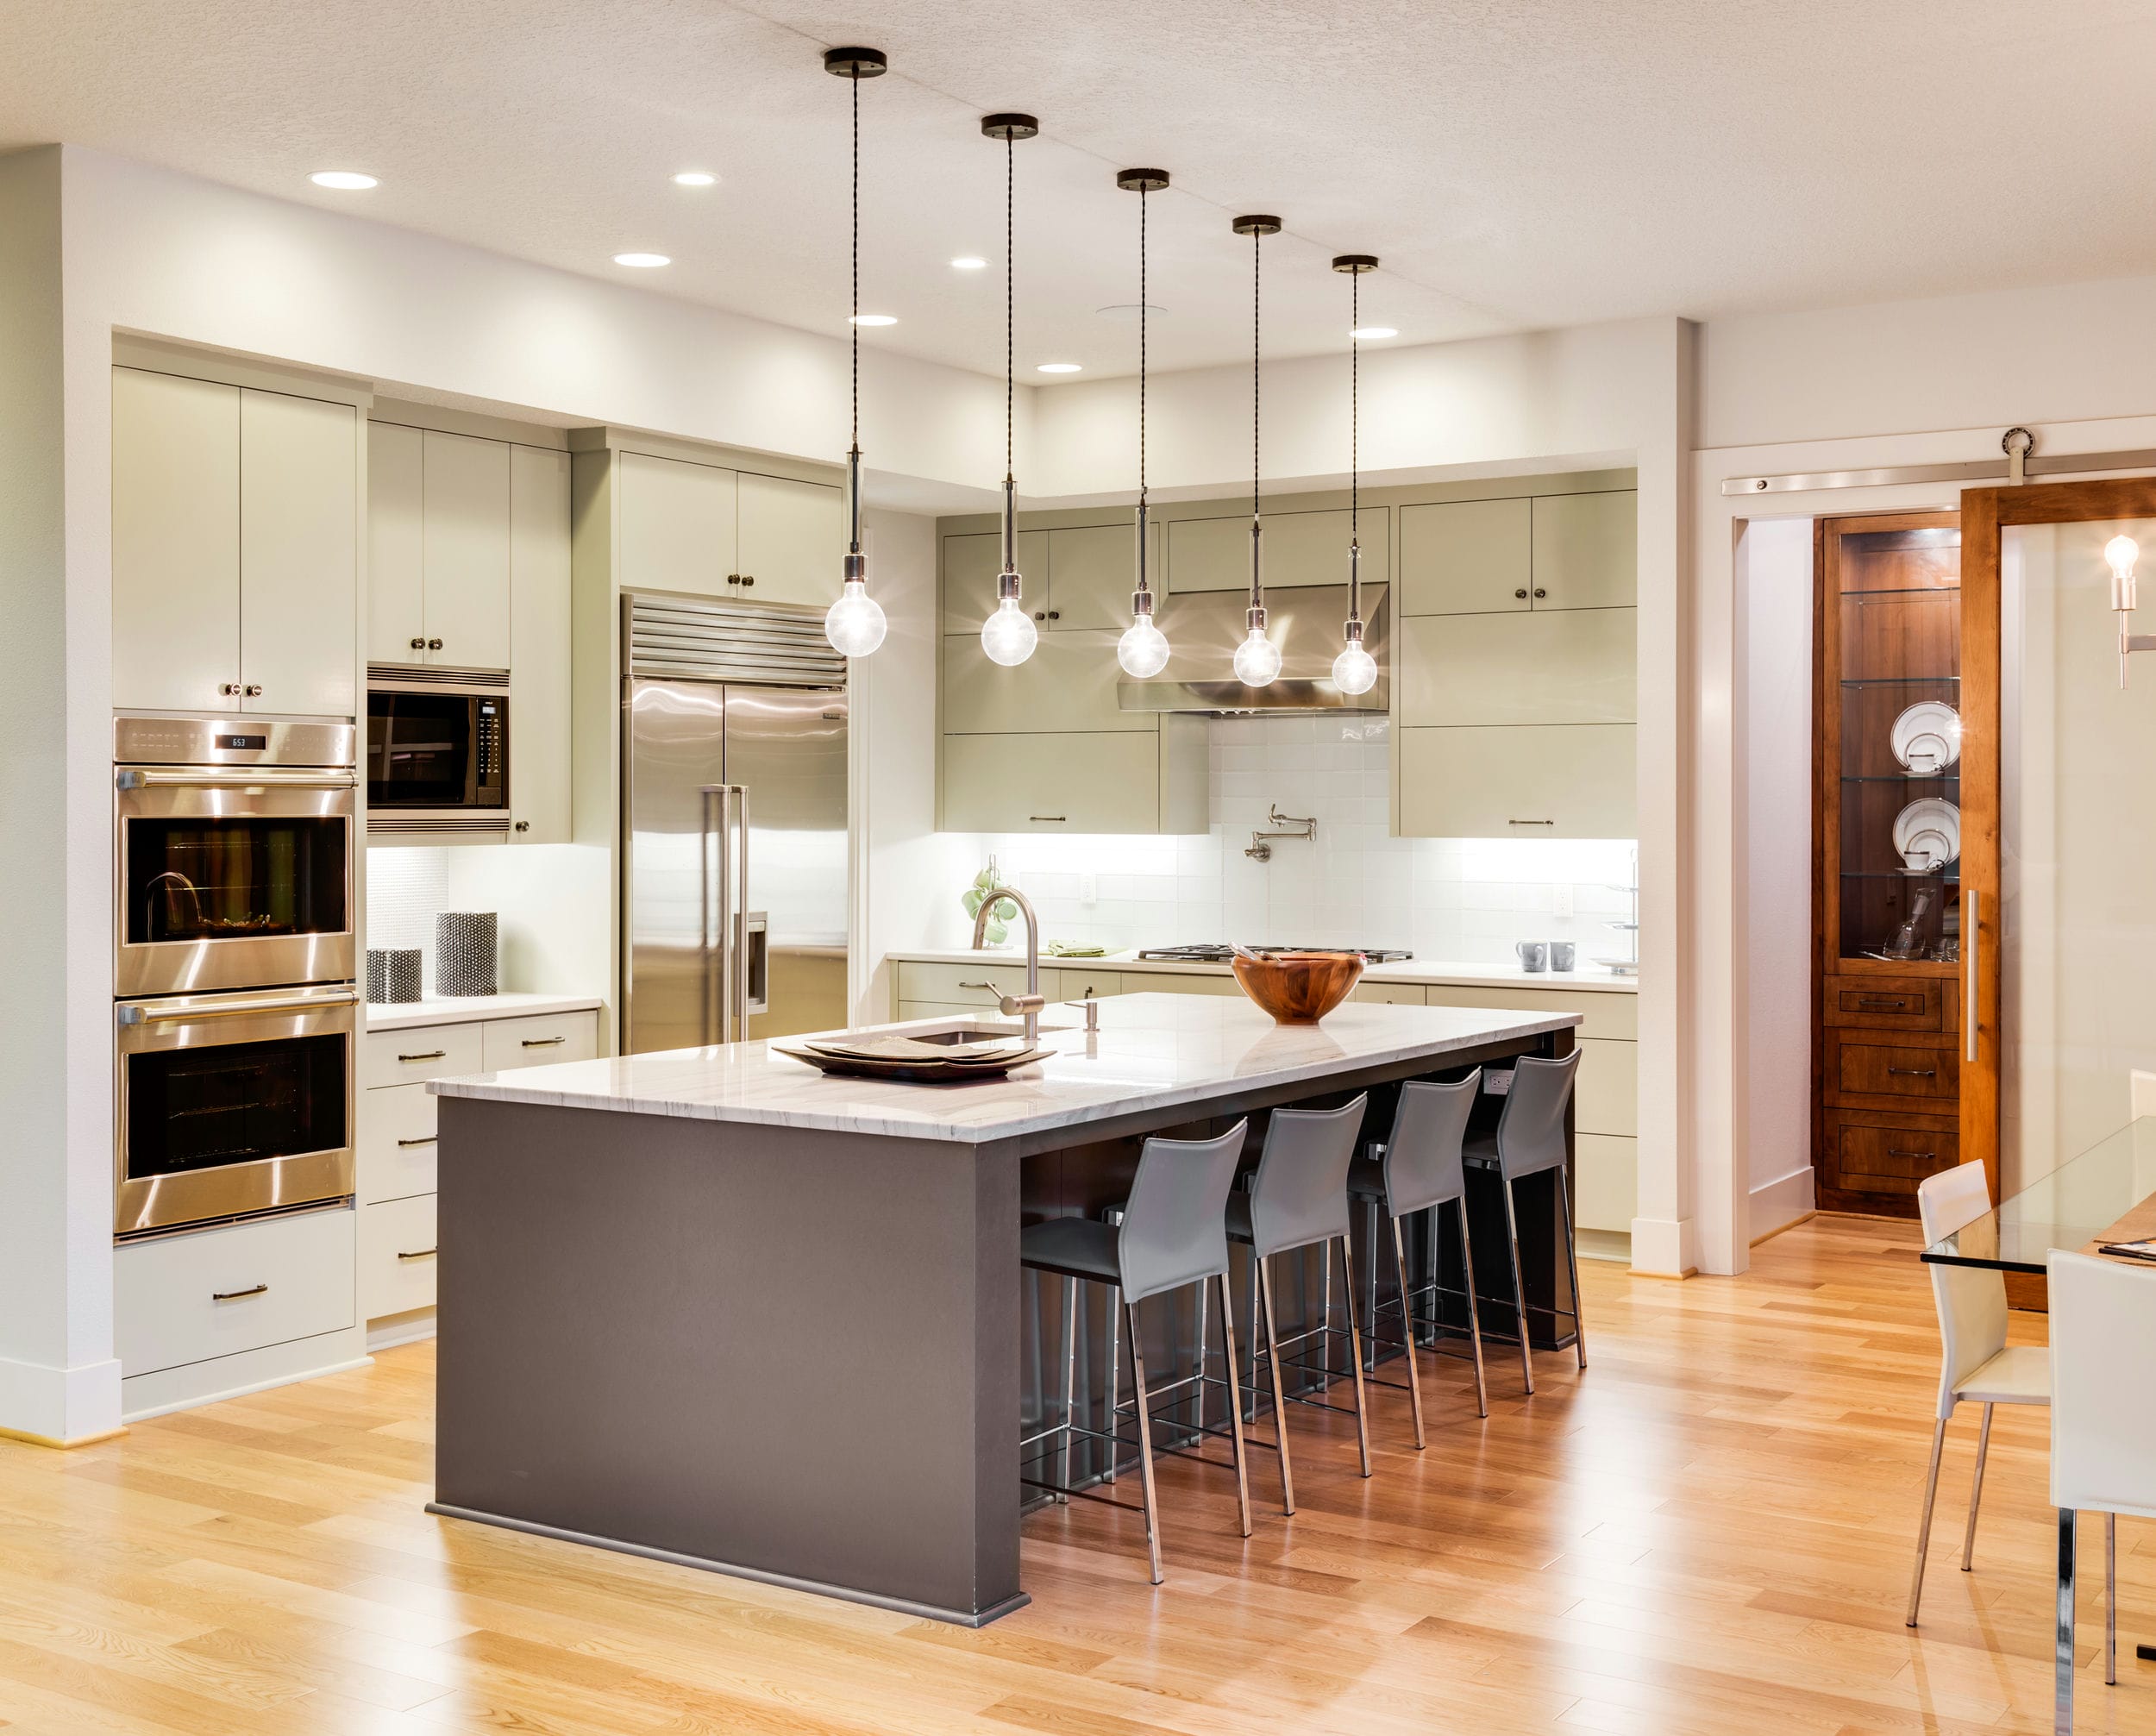 Tips And Tricks For Kitchen Lighting, What Type Of Lighting Is Best For A Kitchen